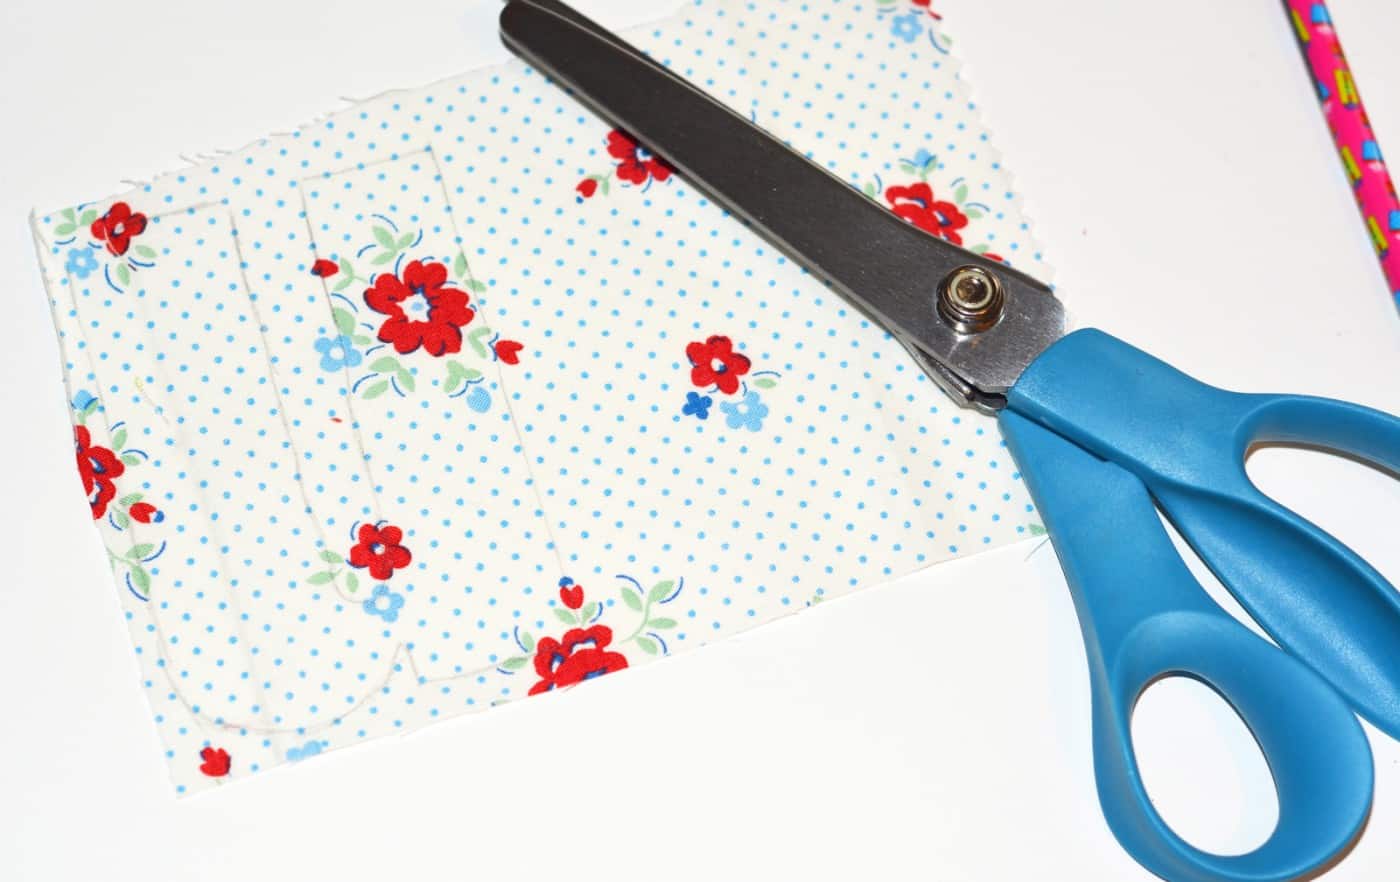 Pair of pinking shears with a piece of fabric